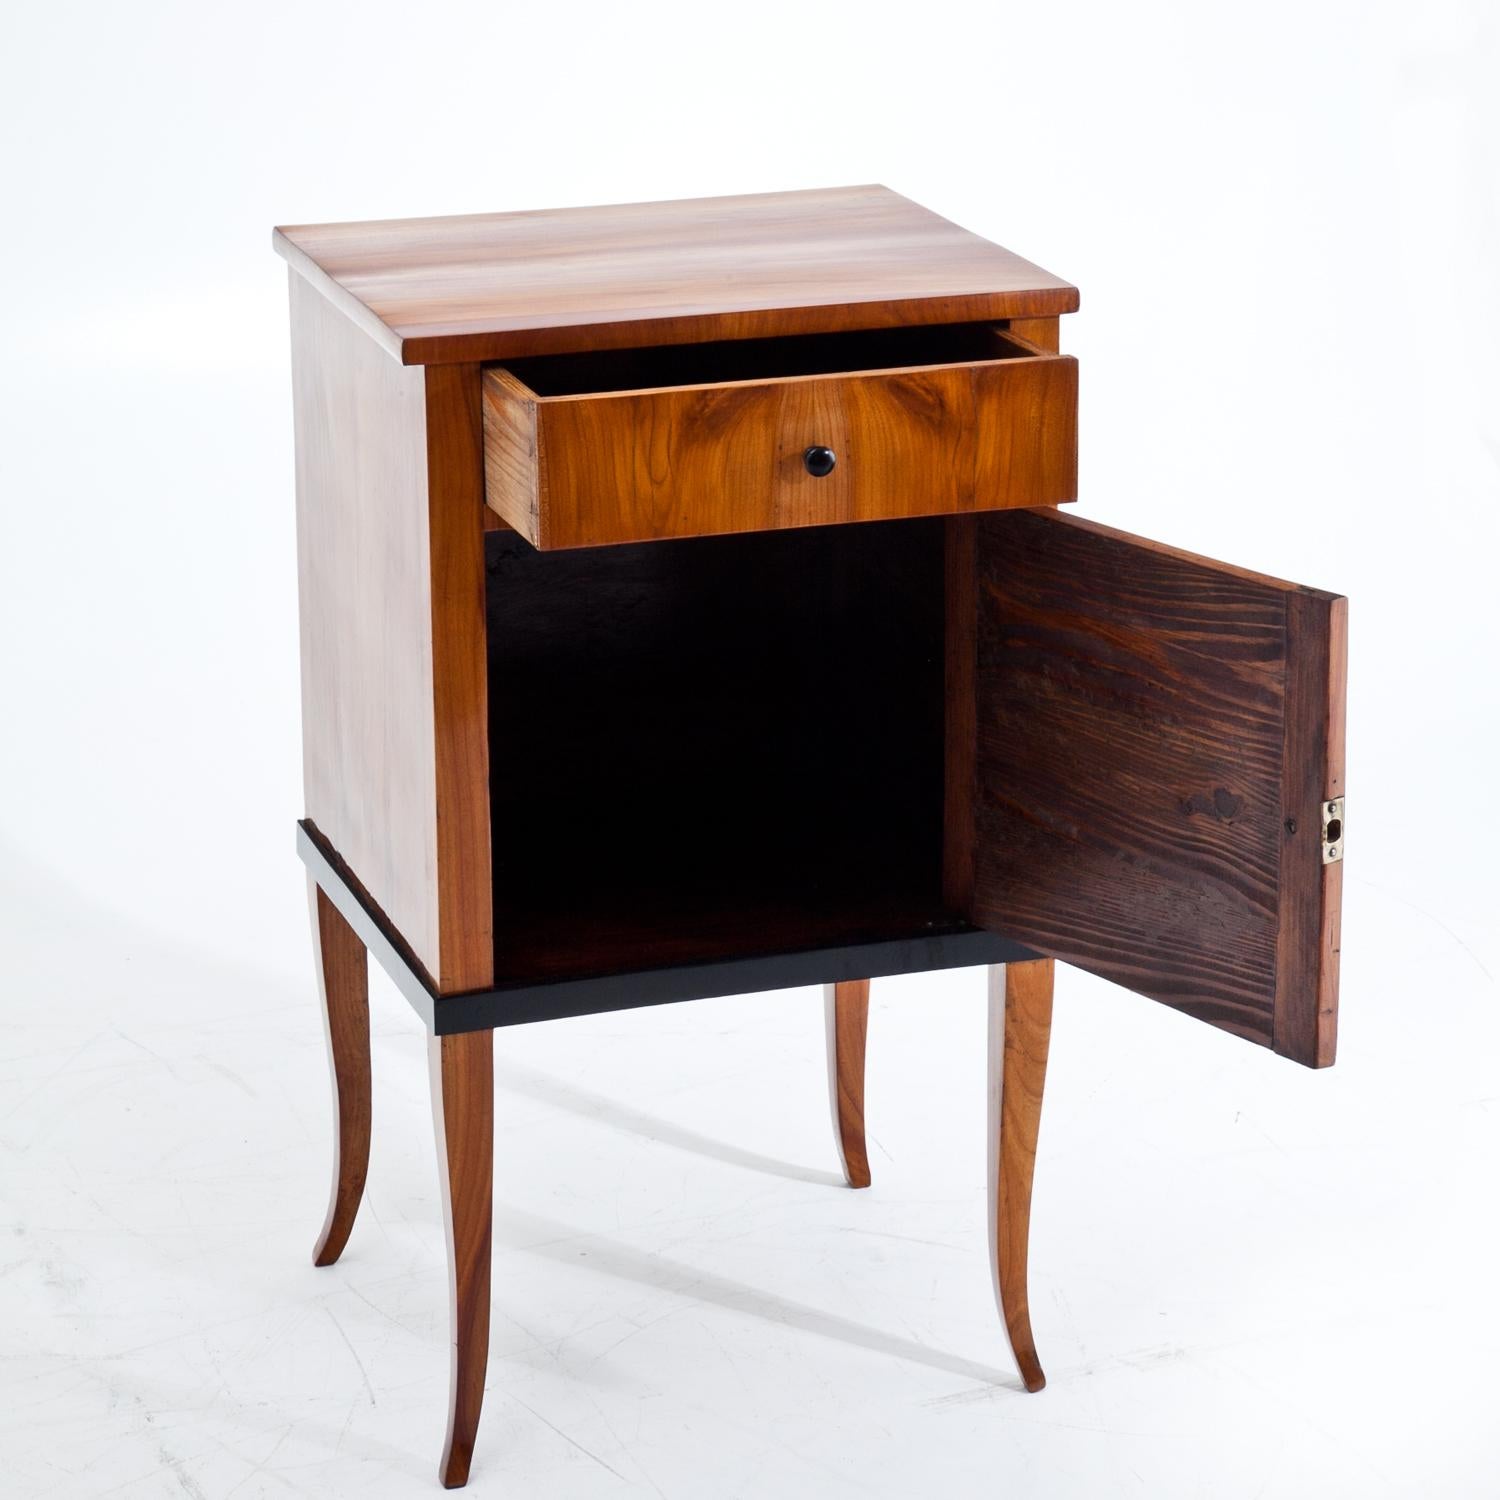 Small cherrywood nightstand standing on S-shaped legs with one door and one drawer. The knobs are ebonized.